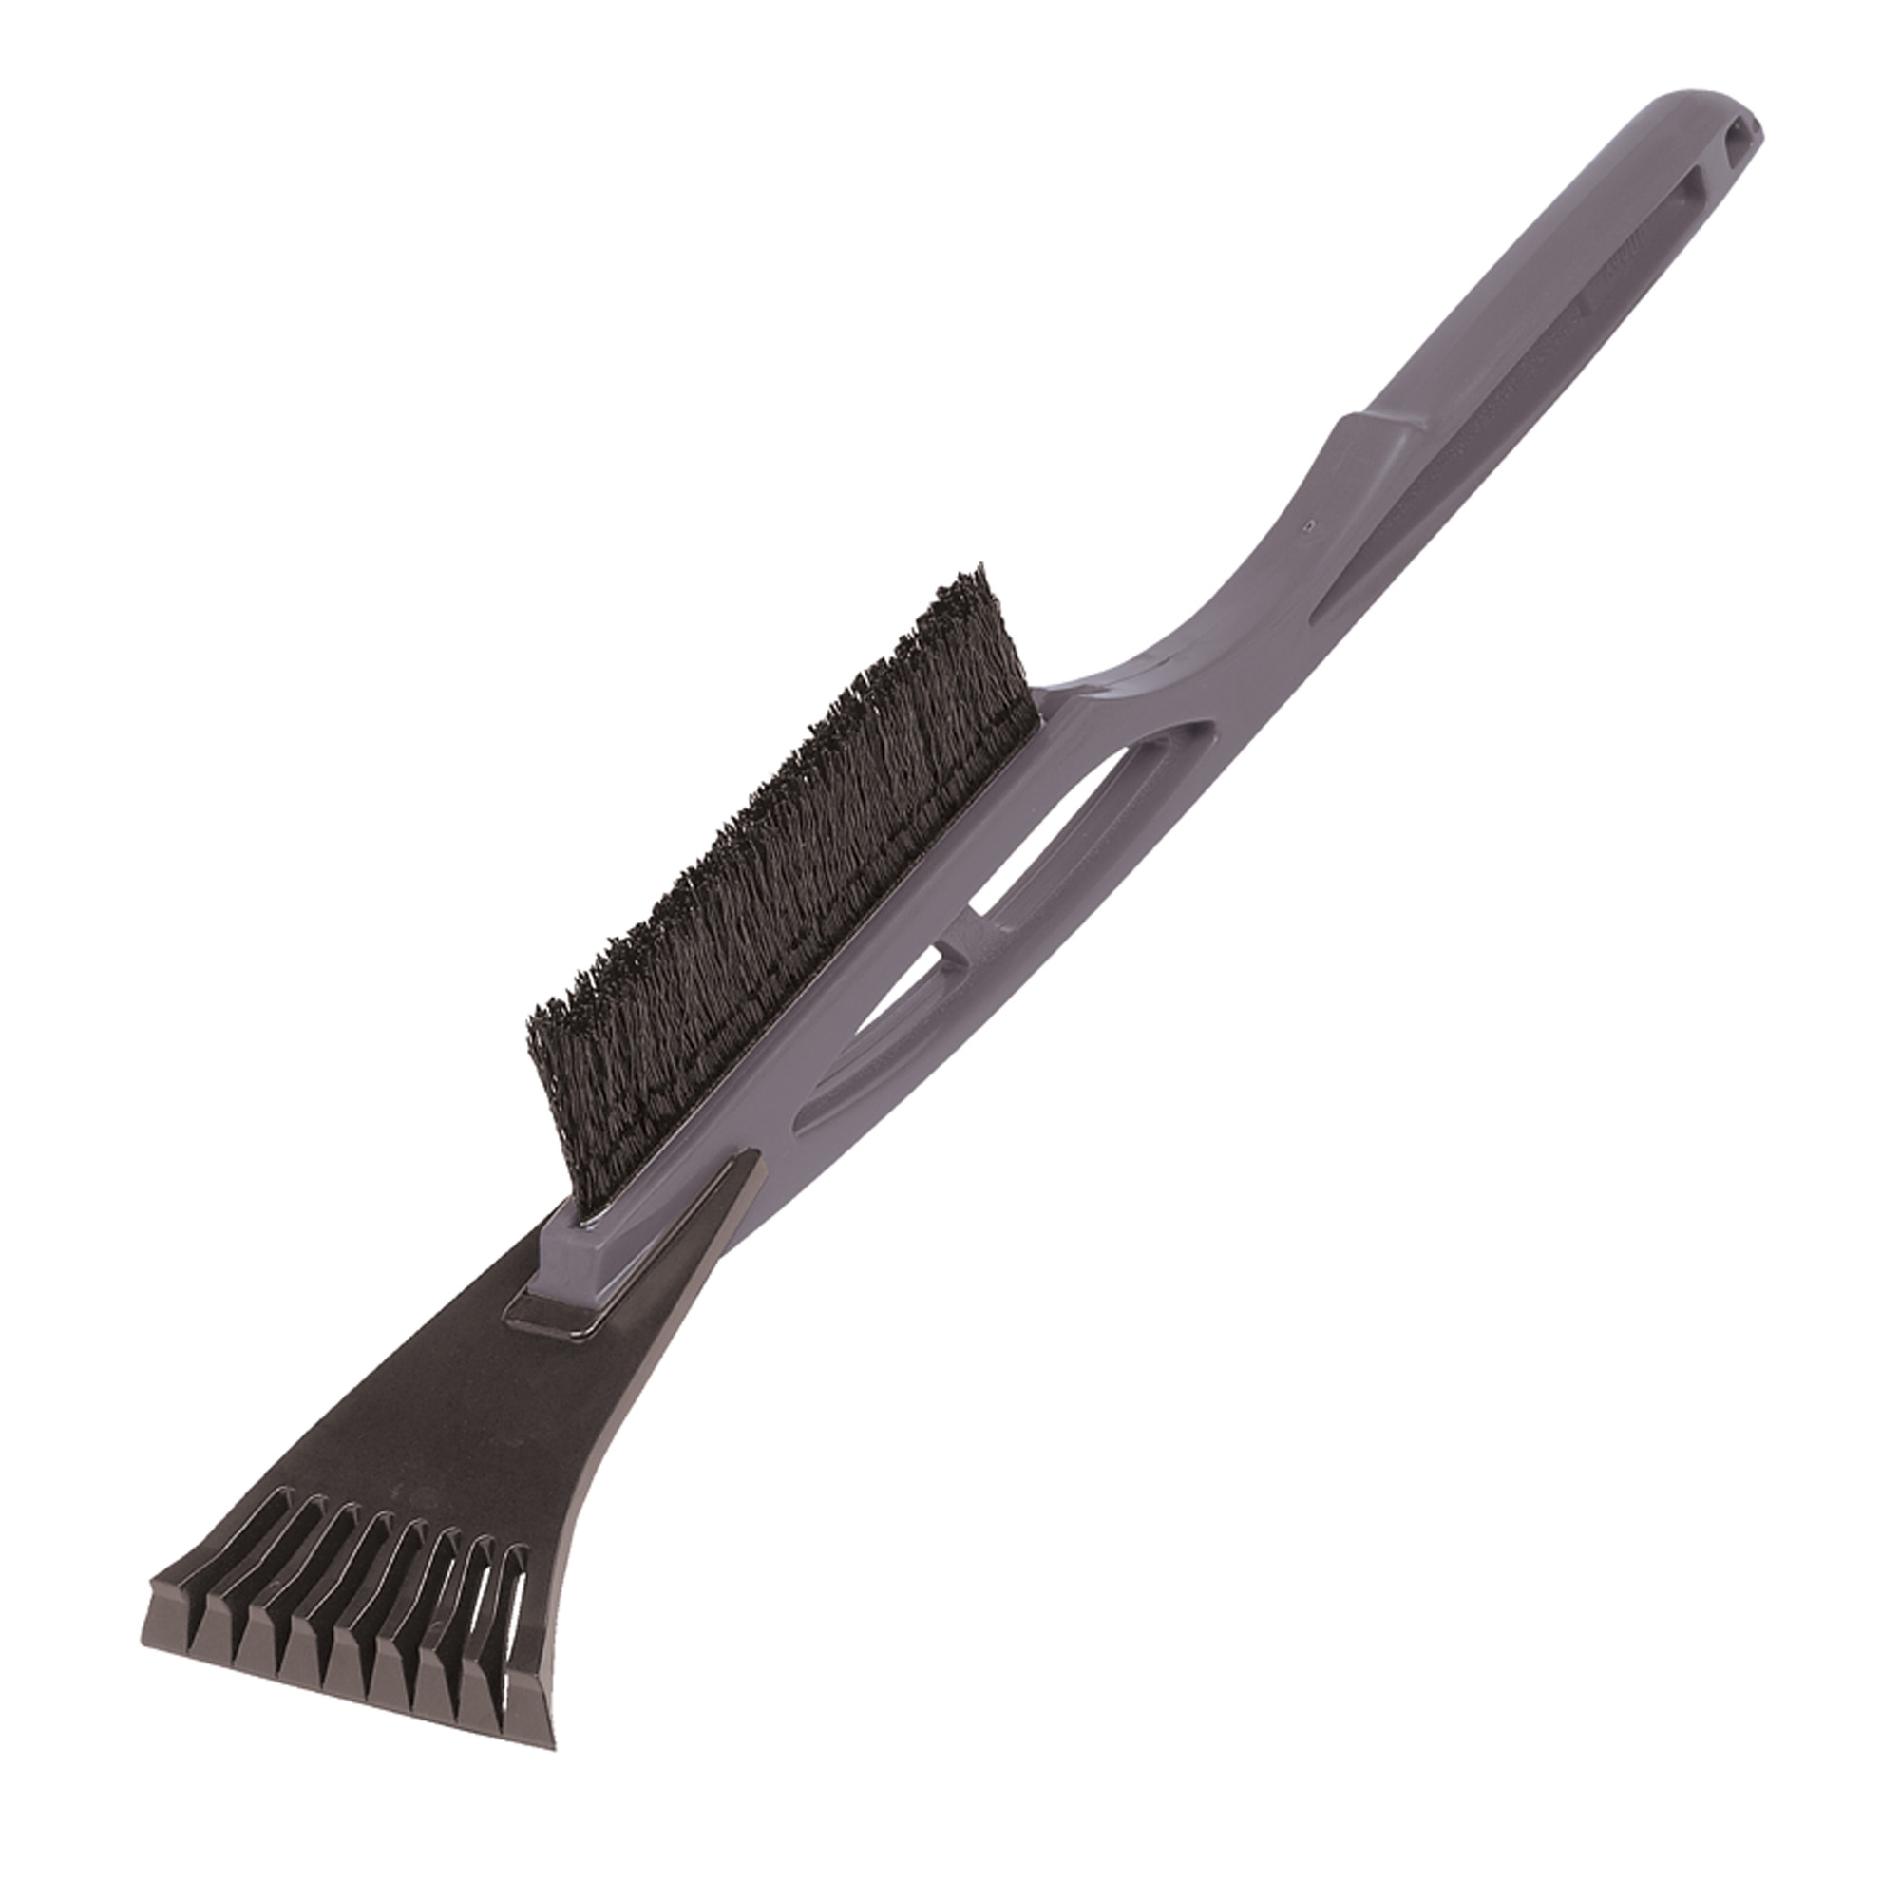 Hopkins 22 in. Deluxe Snowbrush with Bear Claw Scraper